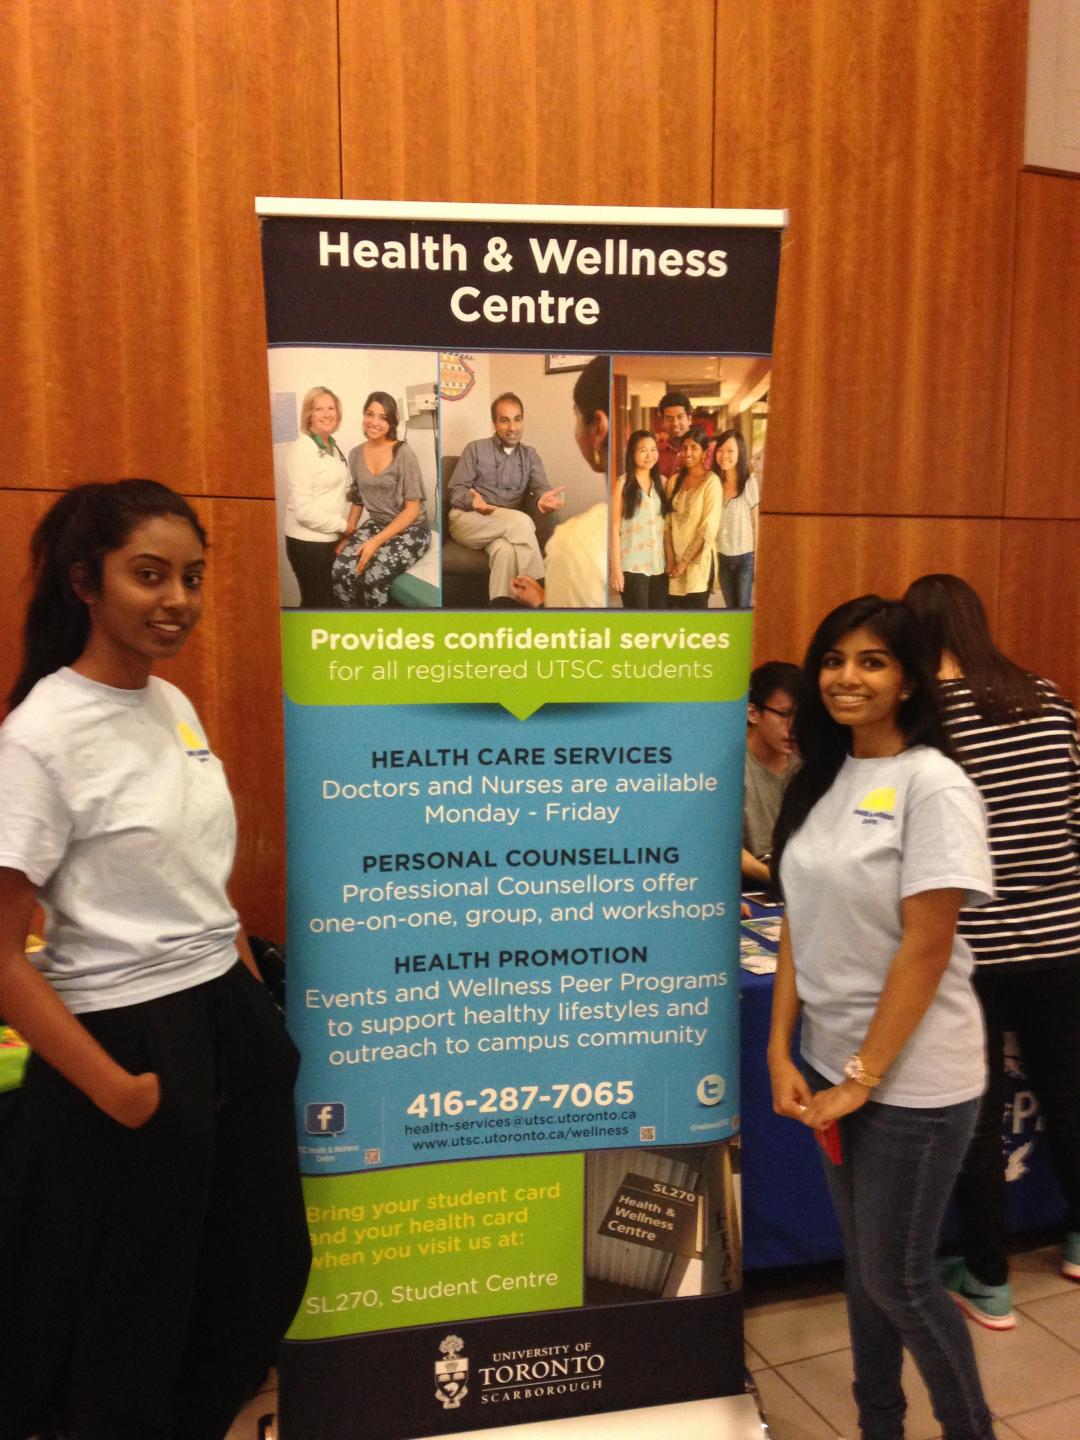 health & wellness centre service poster with students